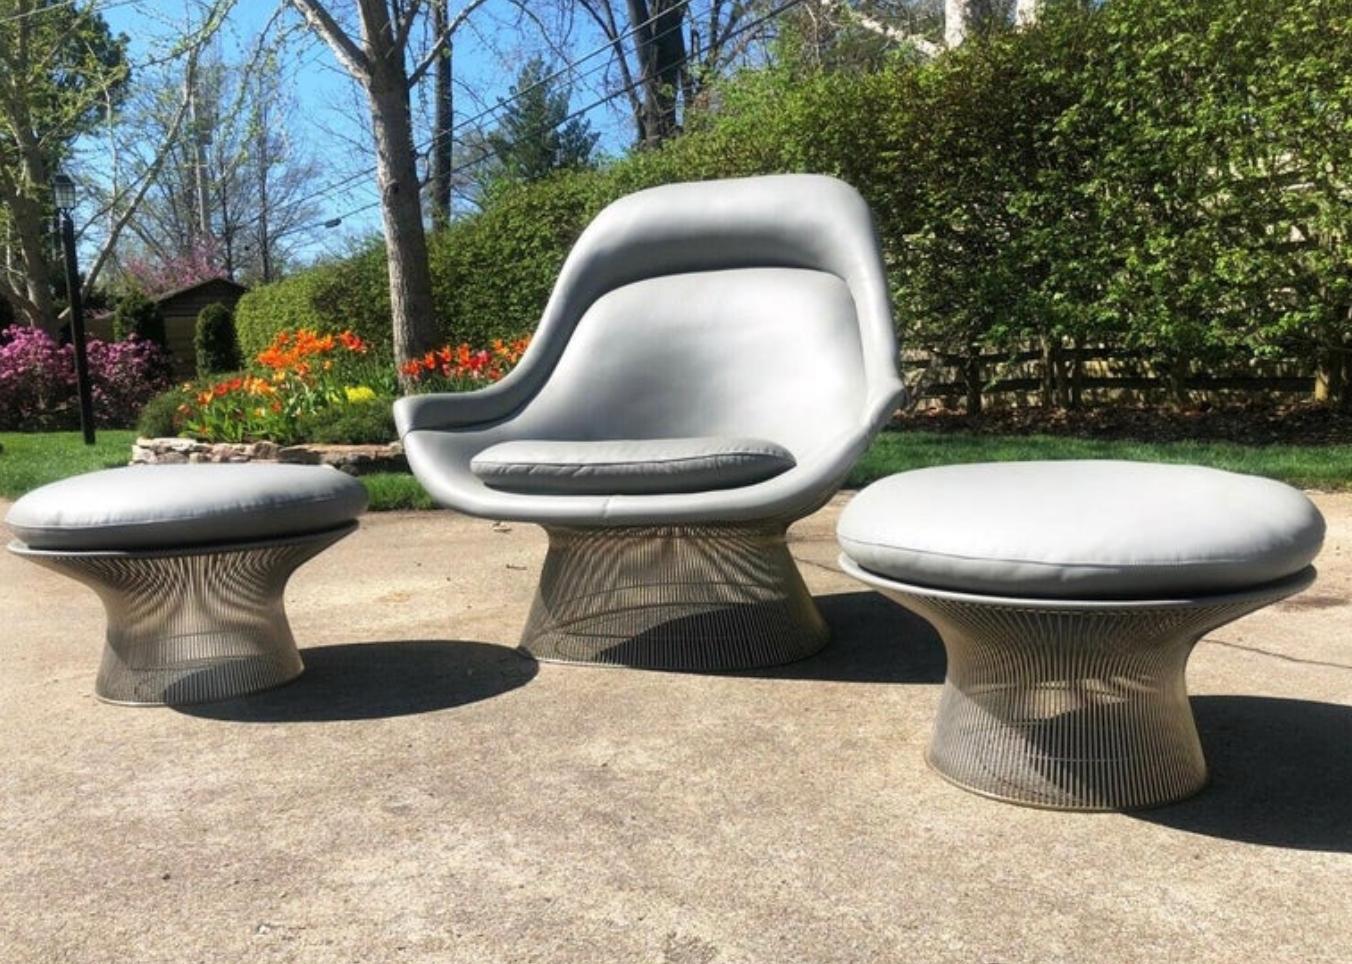 Warren Platner 1705Y Easy Ottoman, Gray Leather and Nickel, Knoll, 1966
Custom gray leather (original); original nickel finish. Ottoman retains original clear acrylic feet. The masterful upholstery in the soft leather accentuates the sensual,